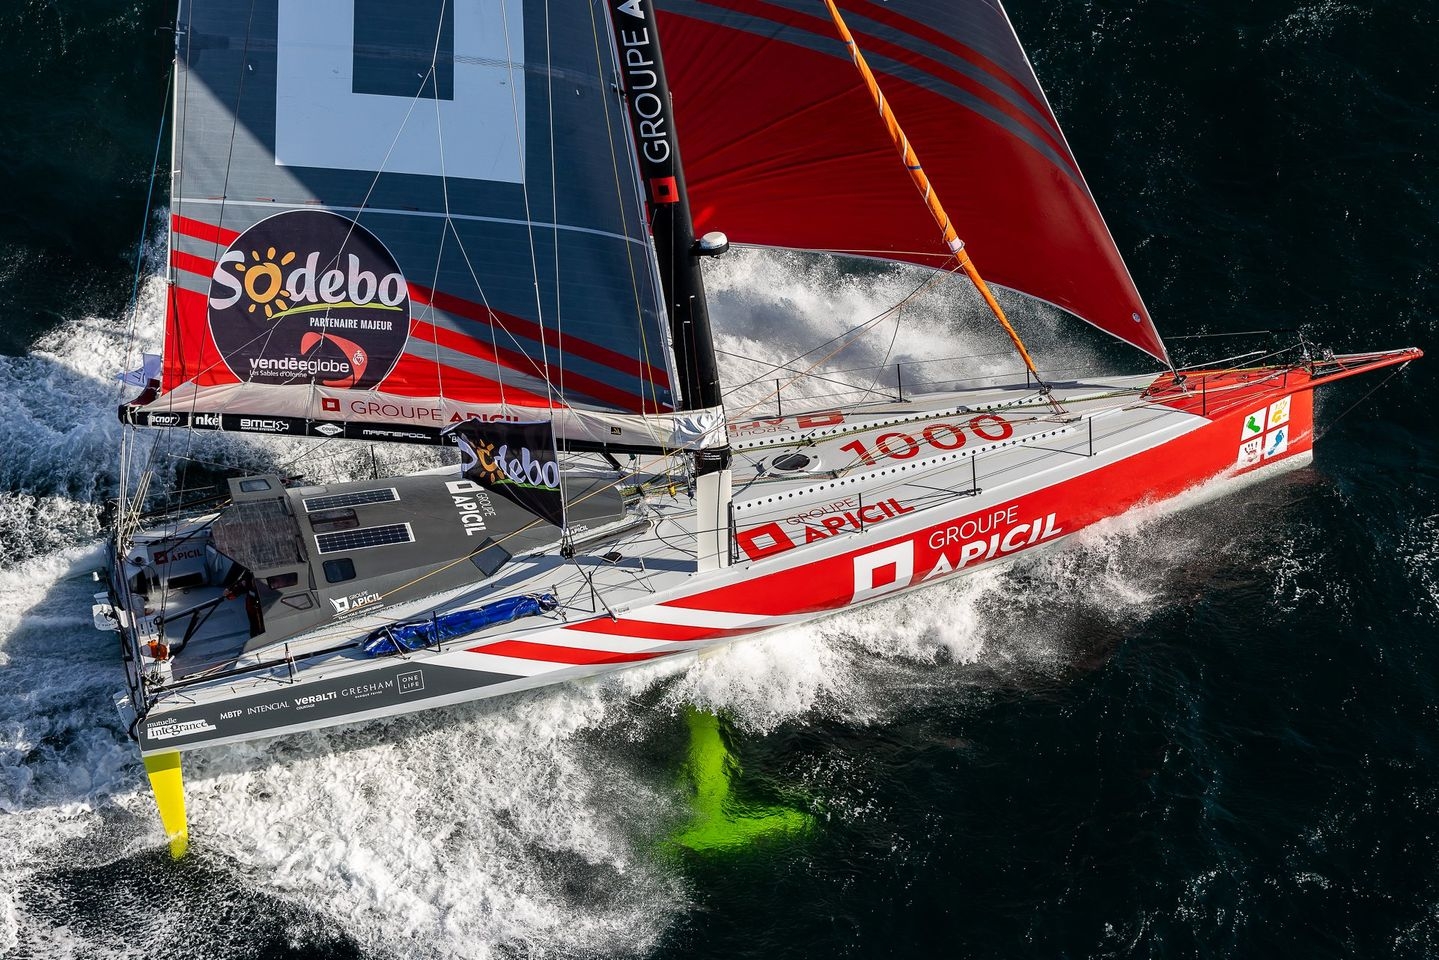  IMOCA Open 60  Vendee Globe  Day 57  Ruyant and Seguin rounded the Cape in 3rd and 4th